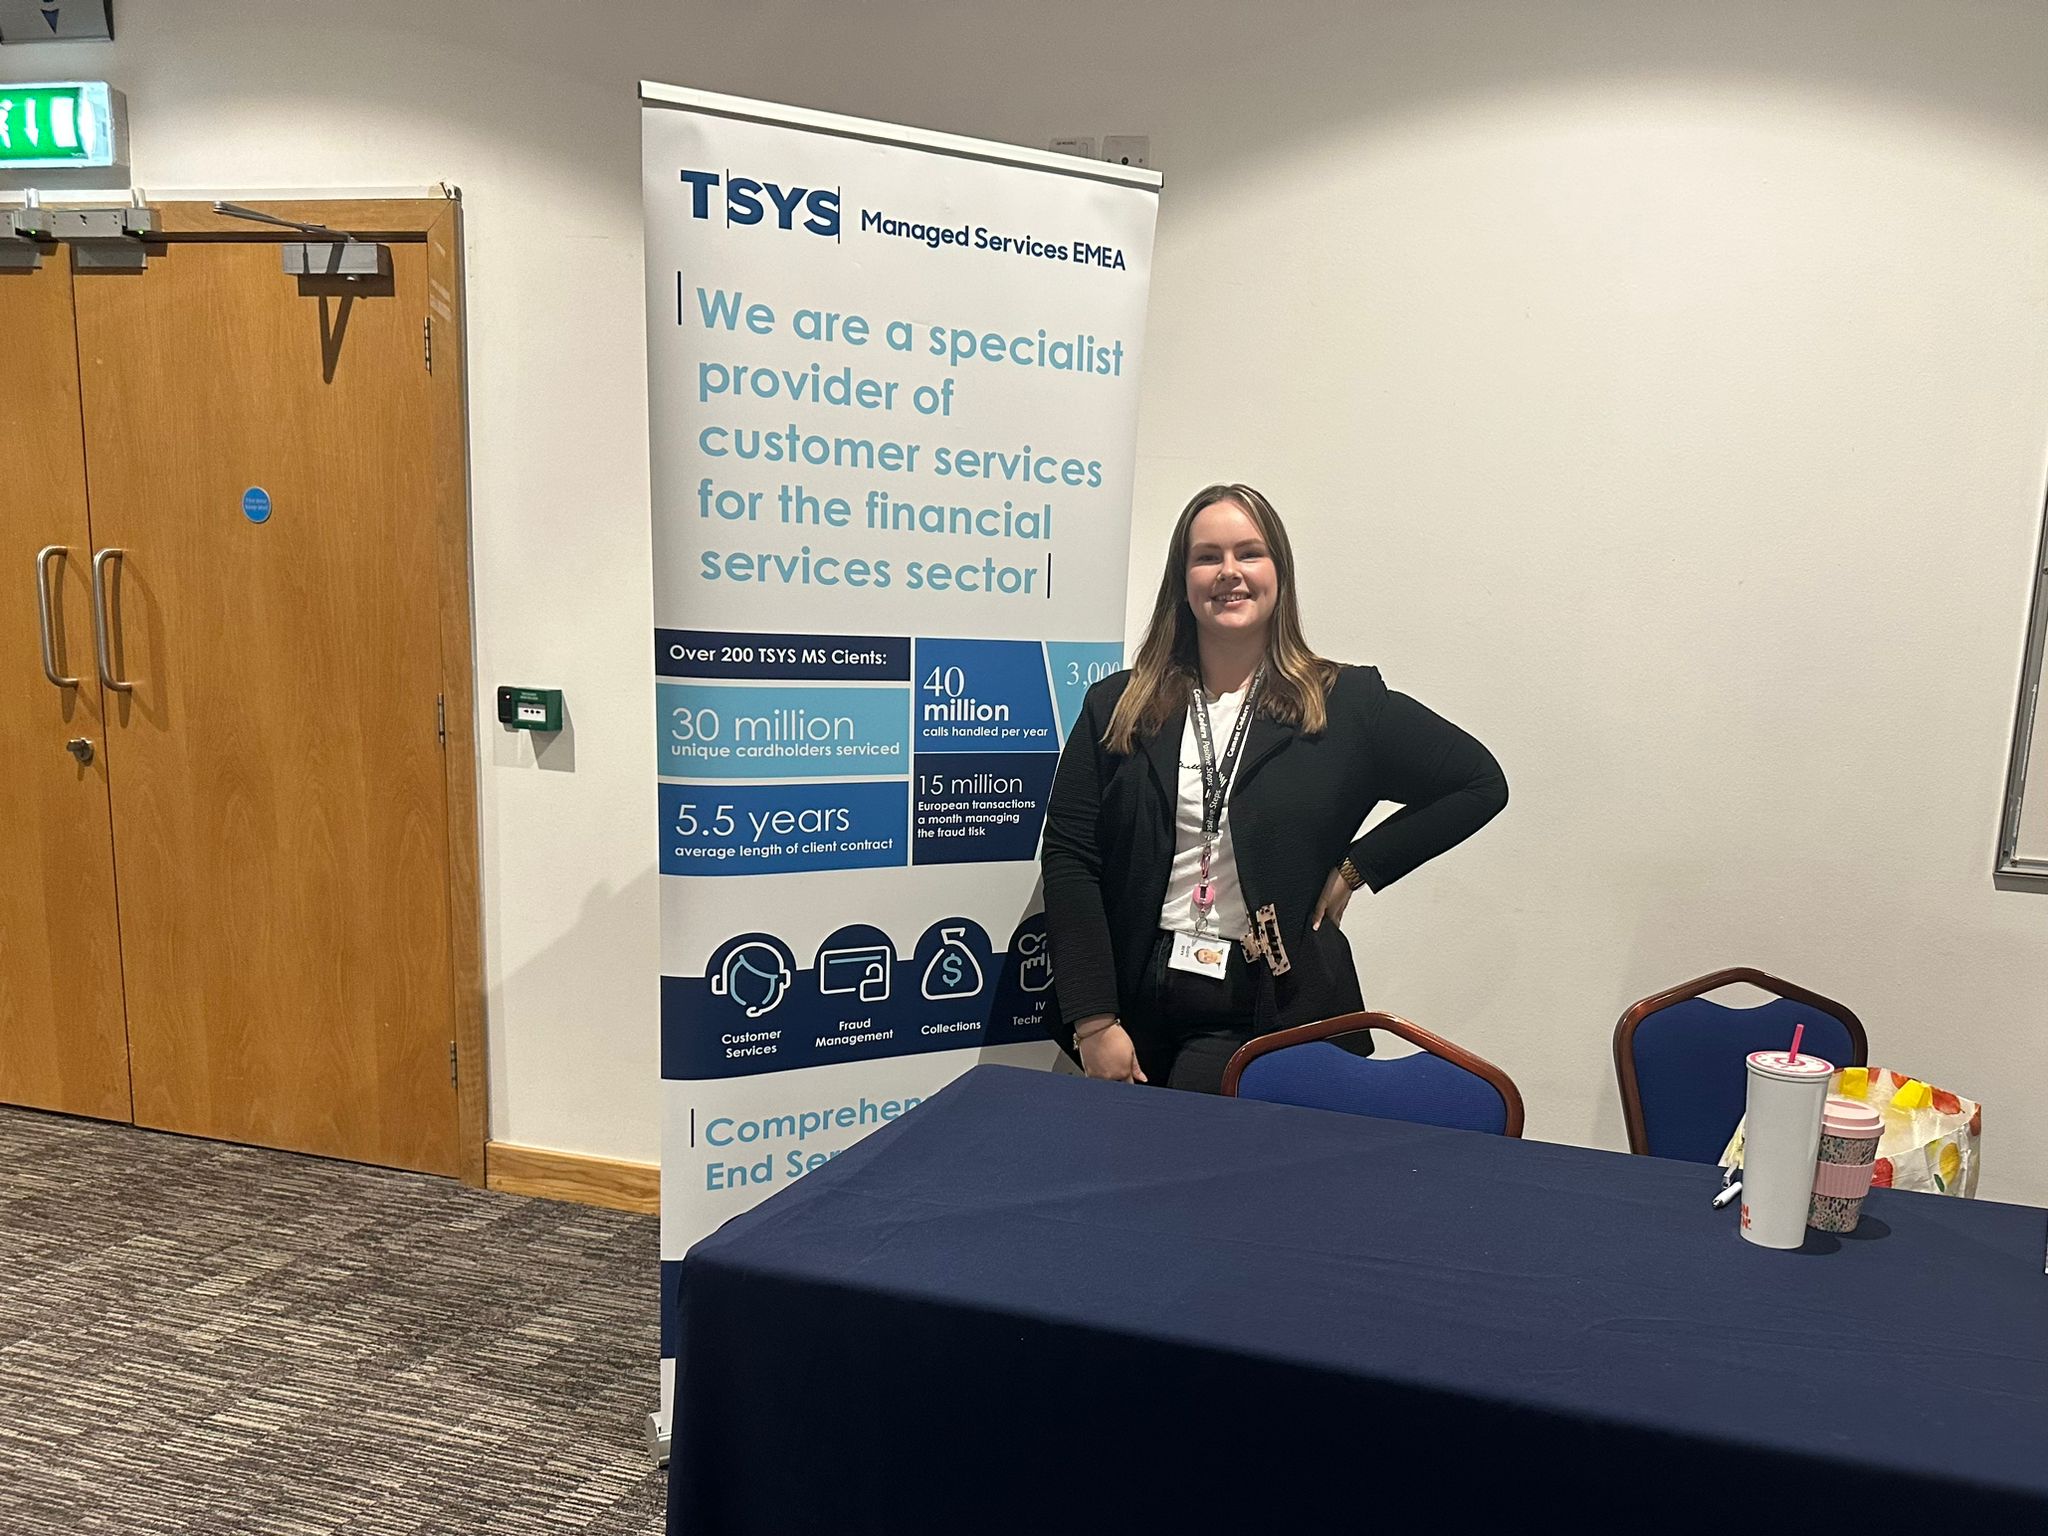 TSYS Managed Services EMEA at our event in Coventry